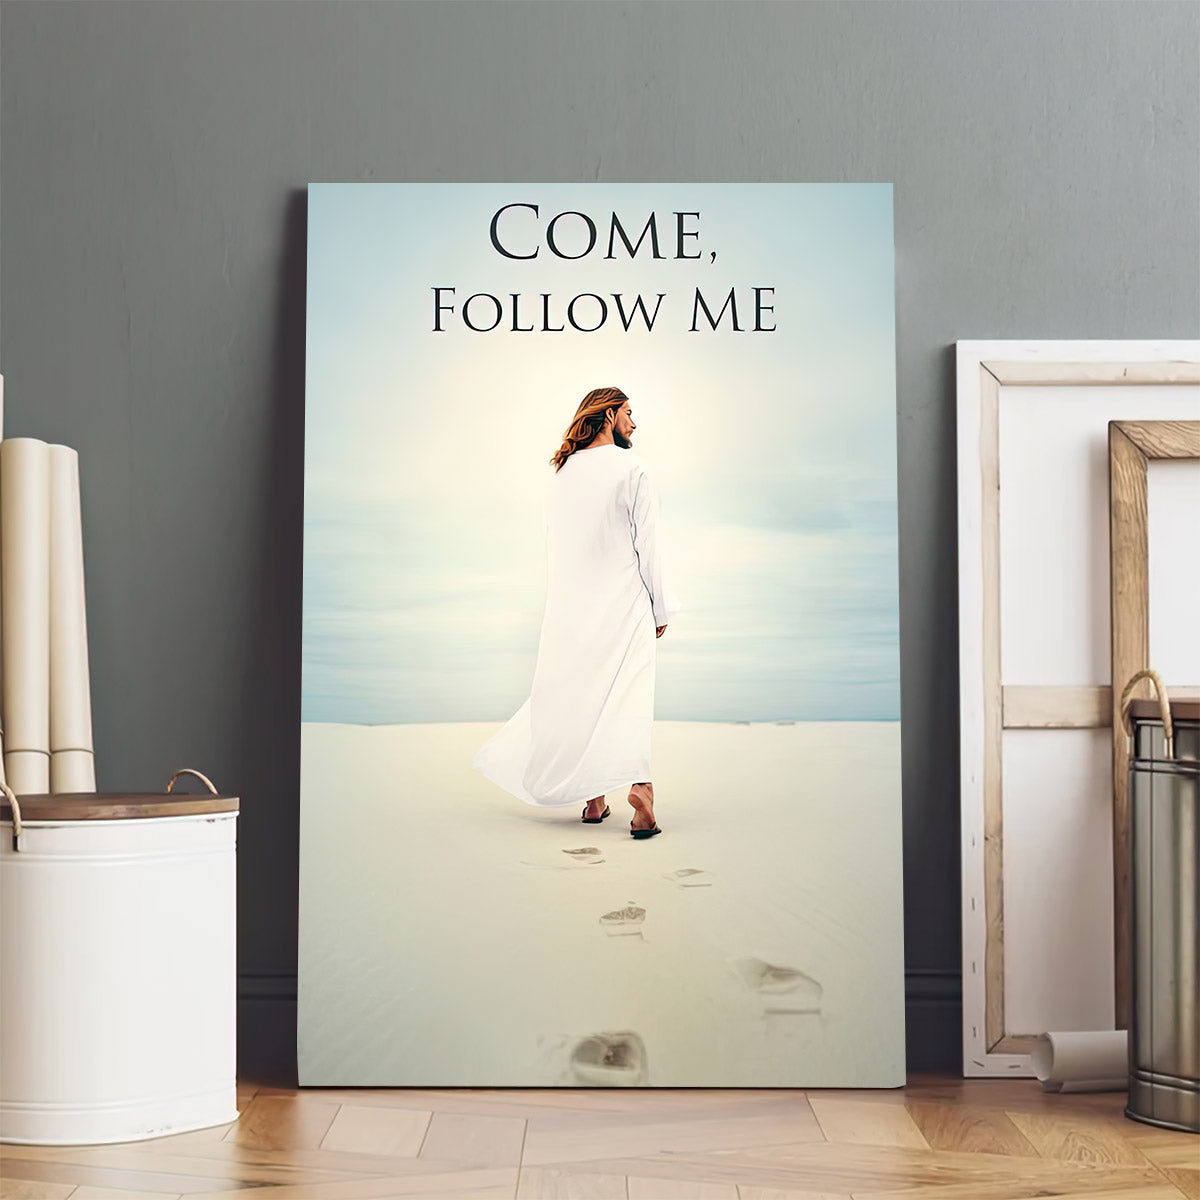 Come Follow Me Canvas - Jesus Walking Leaving His Footprints In Sand Canvas Pictures - Jesus Canvas Painting - Christian Canvas Prints